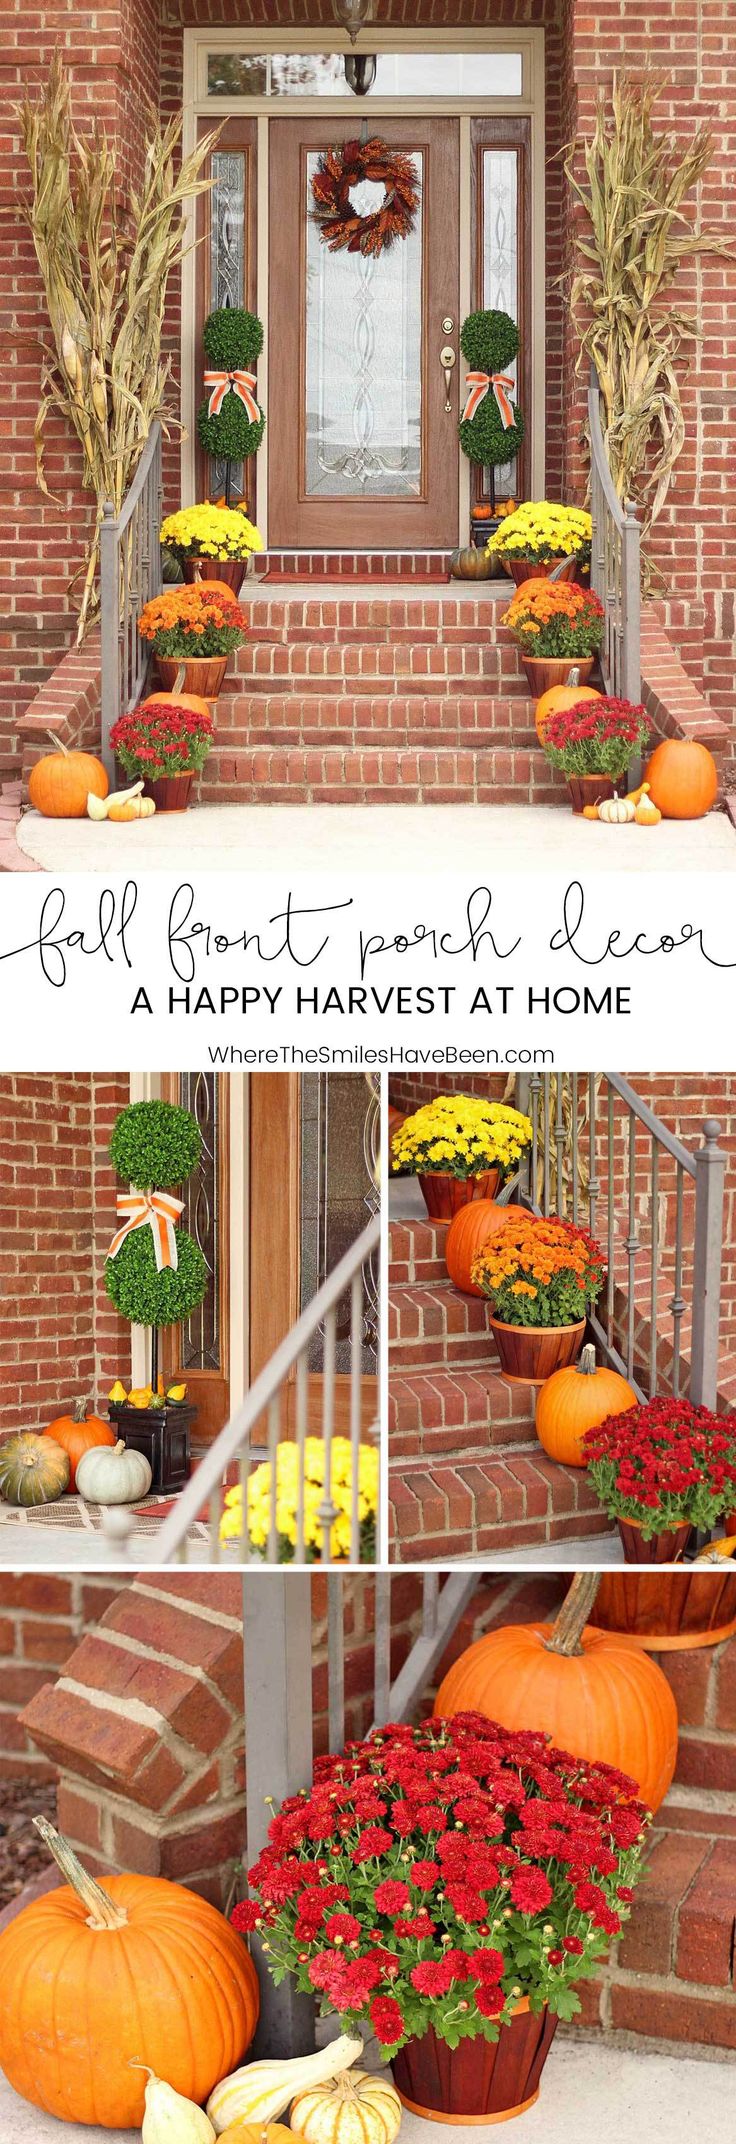 Fall Front Porch Decor: Our Happy Harvest at Home!